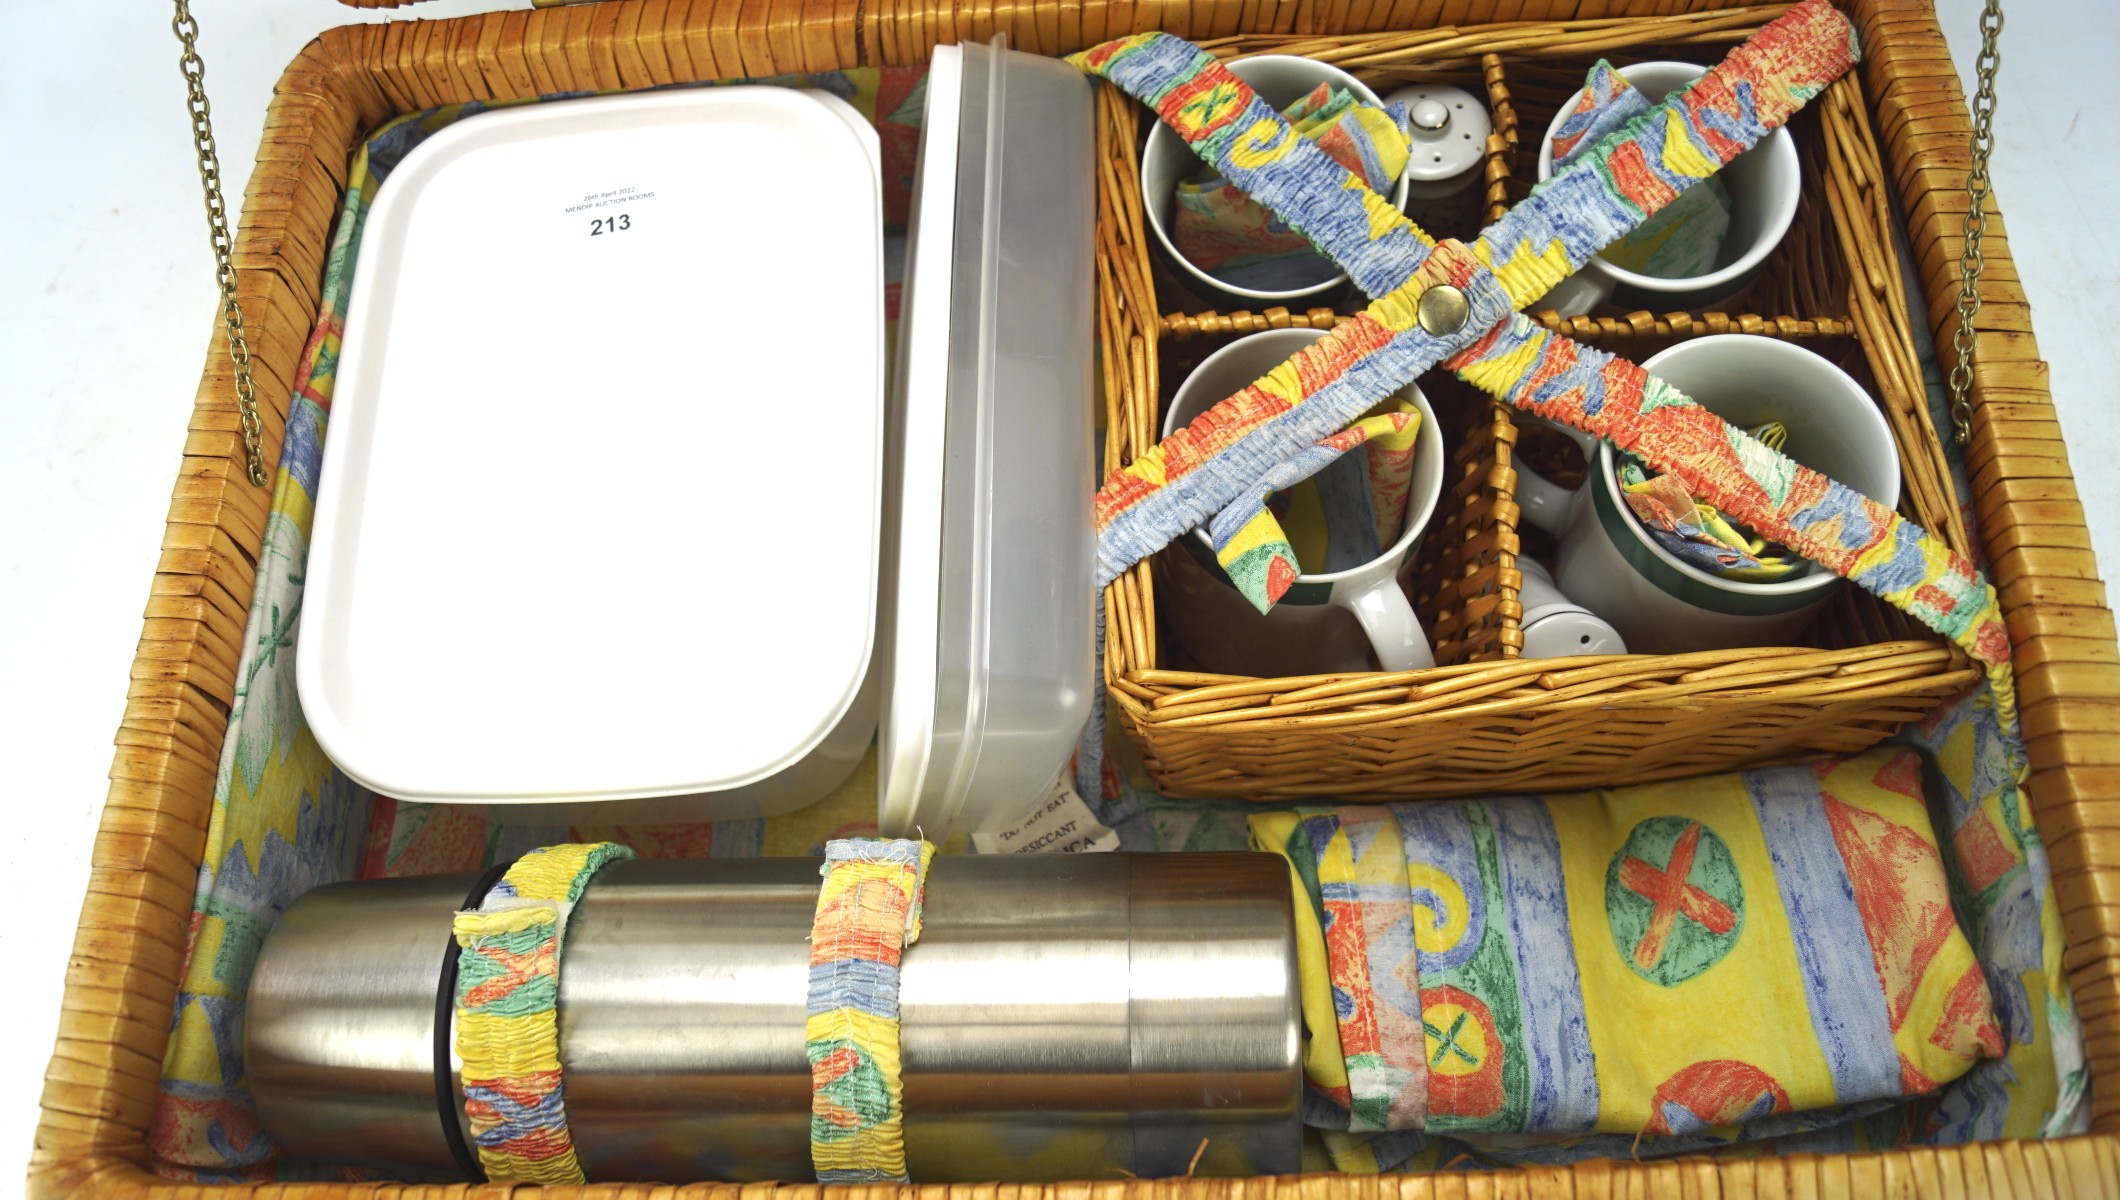 A wicker picnic basket with contents, including plates, thermos, mugs, cutlery and other items, - Image 2 of 3